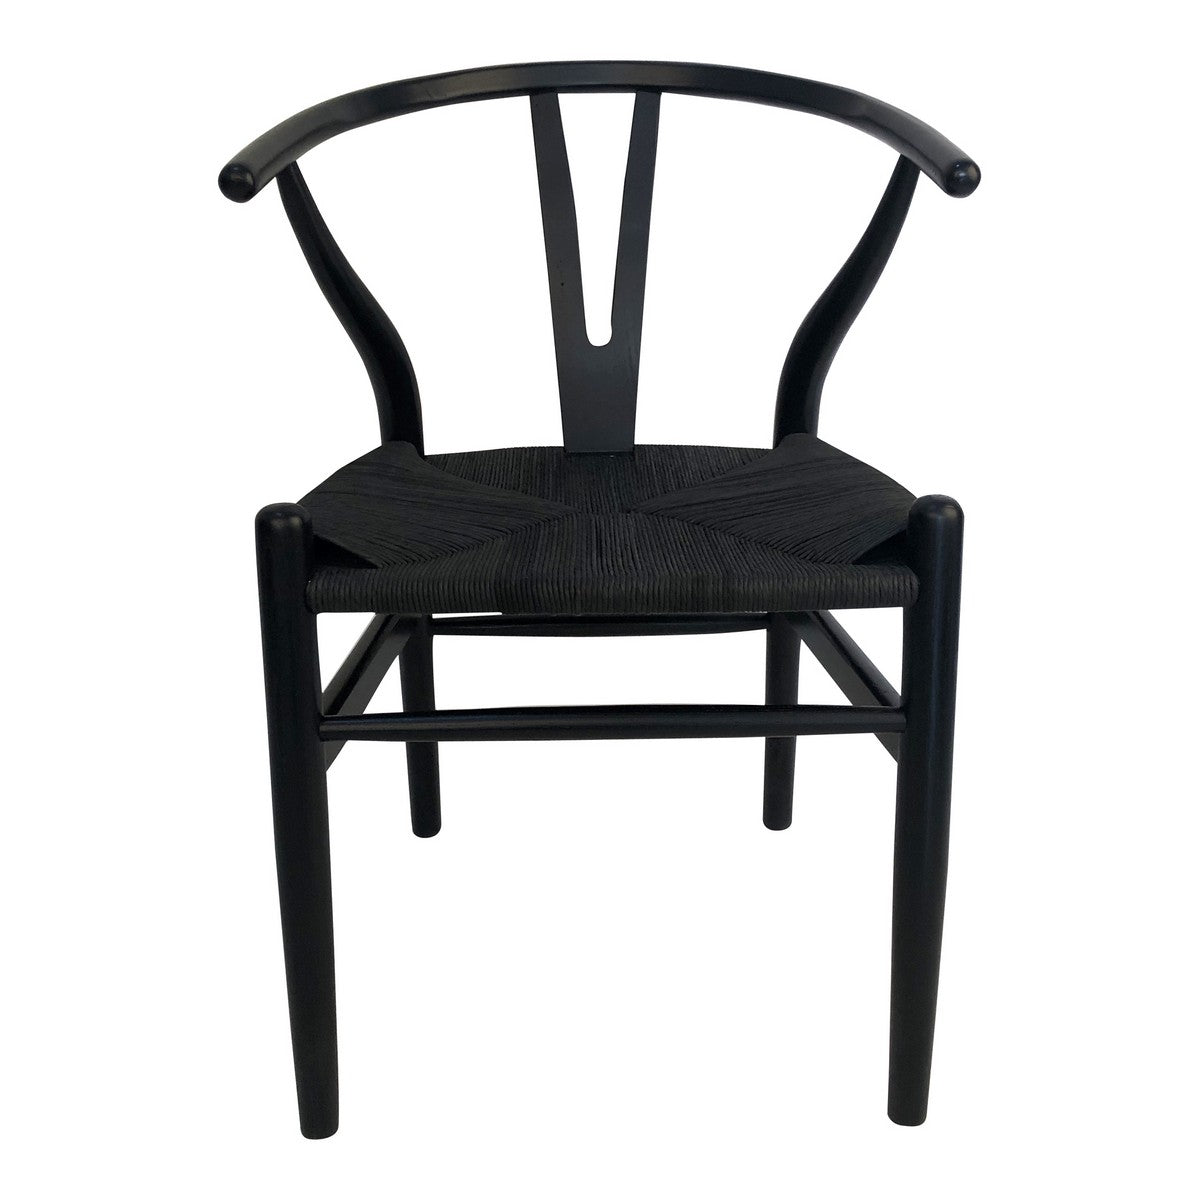 Moe's Home Collection Ventana Dining Chair Black-Set of Two - FG-1015-02 - Moe's Home Collection - Dining Chairs - Minimal And Modern - 1